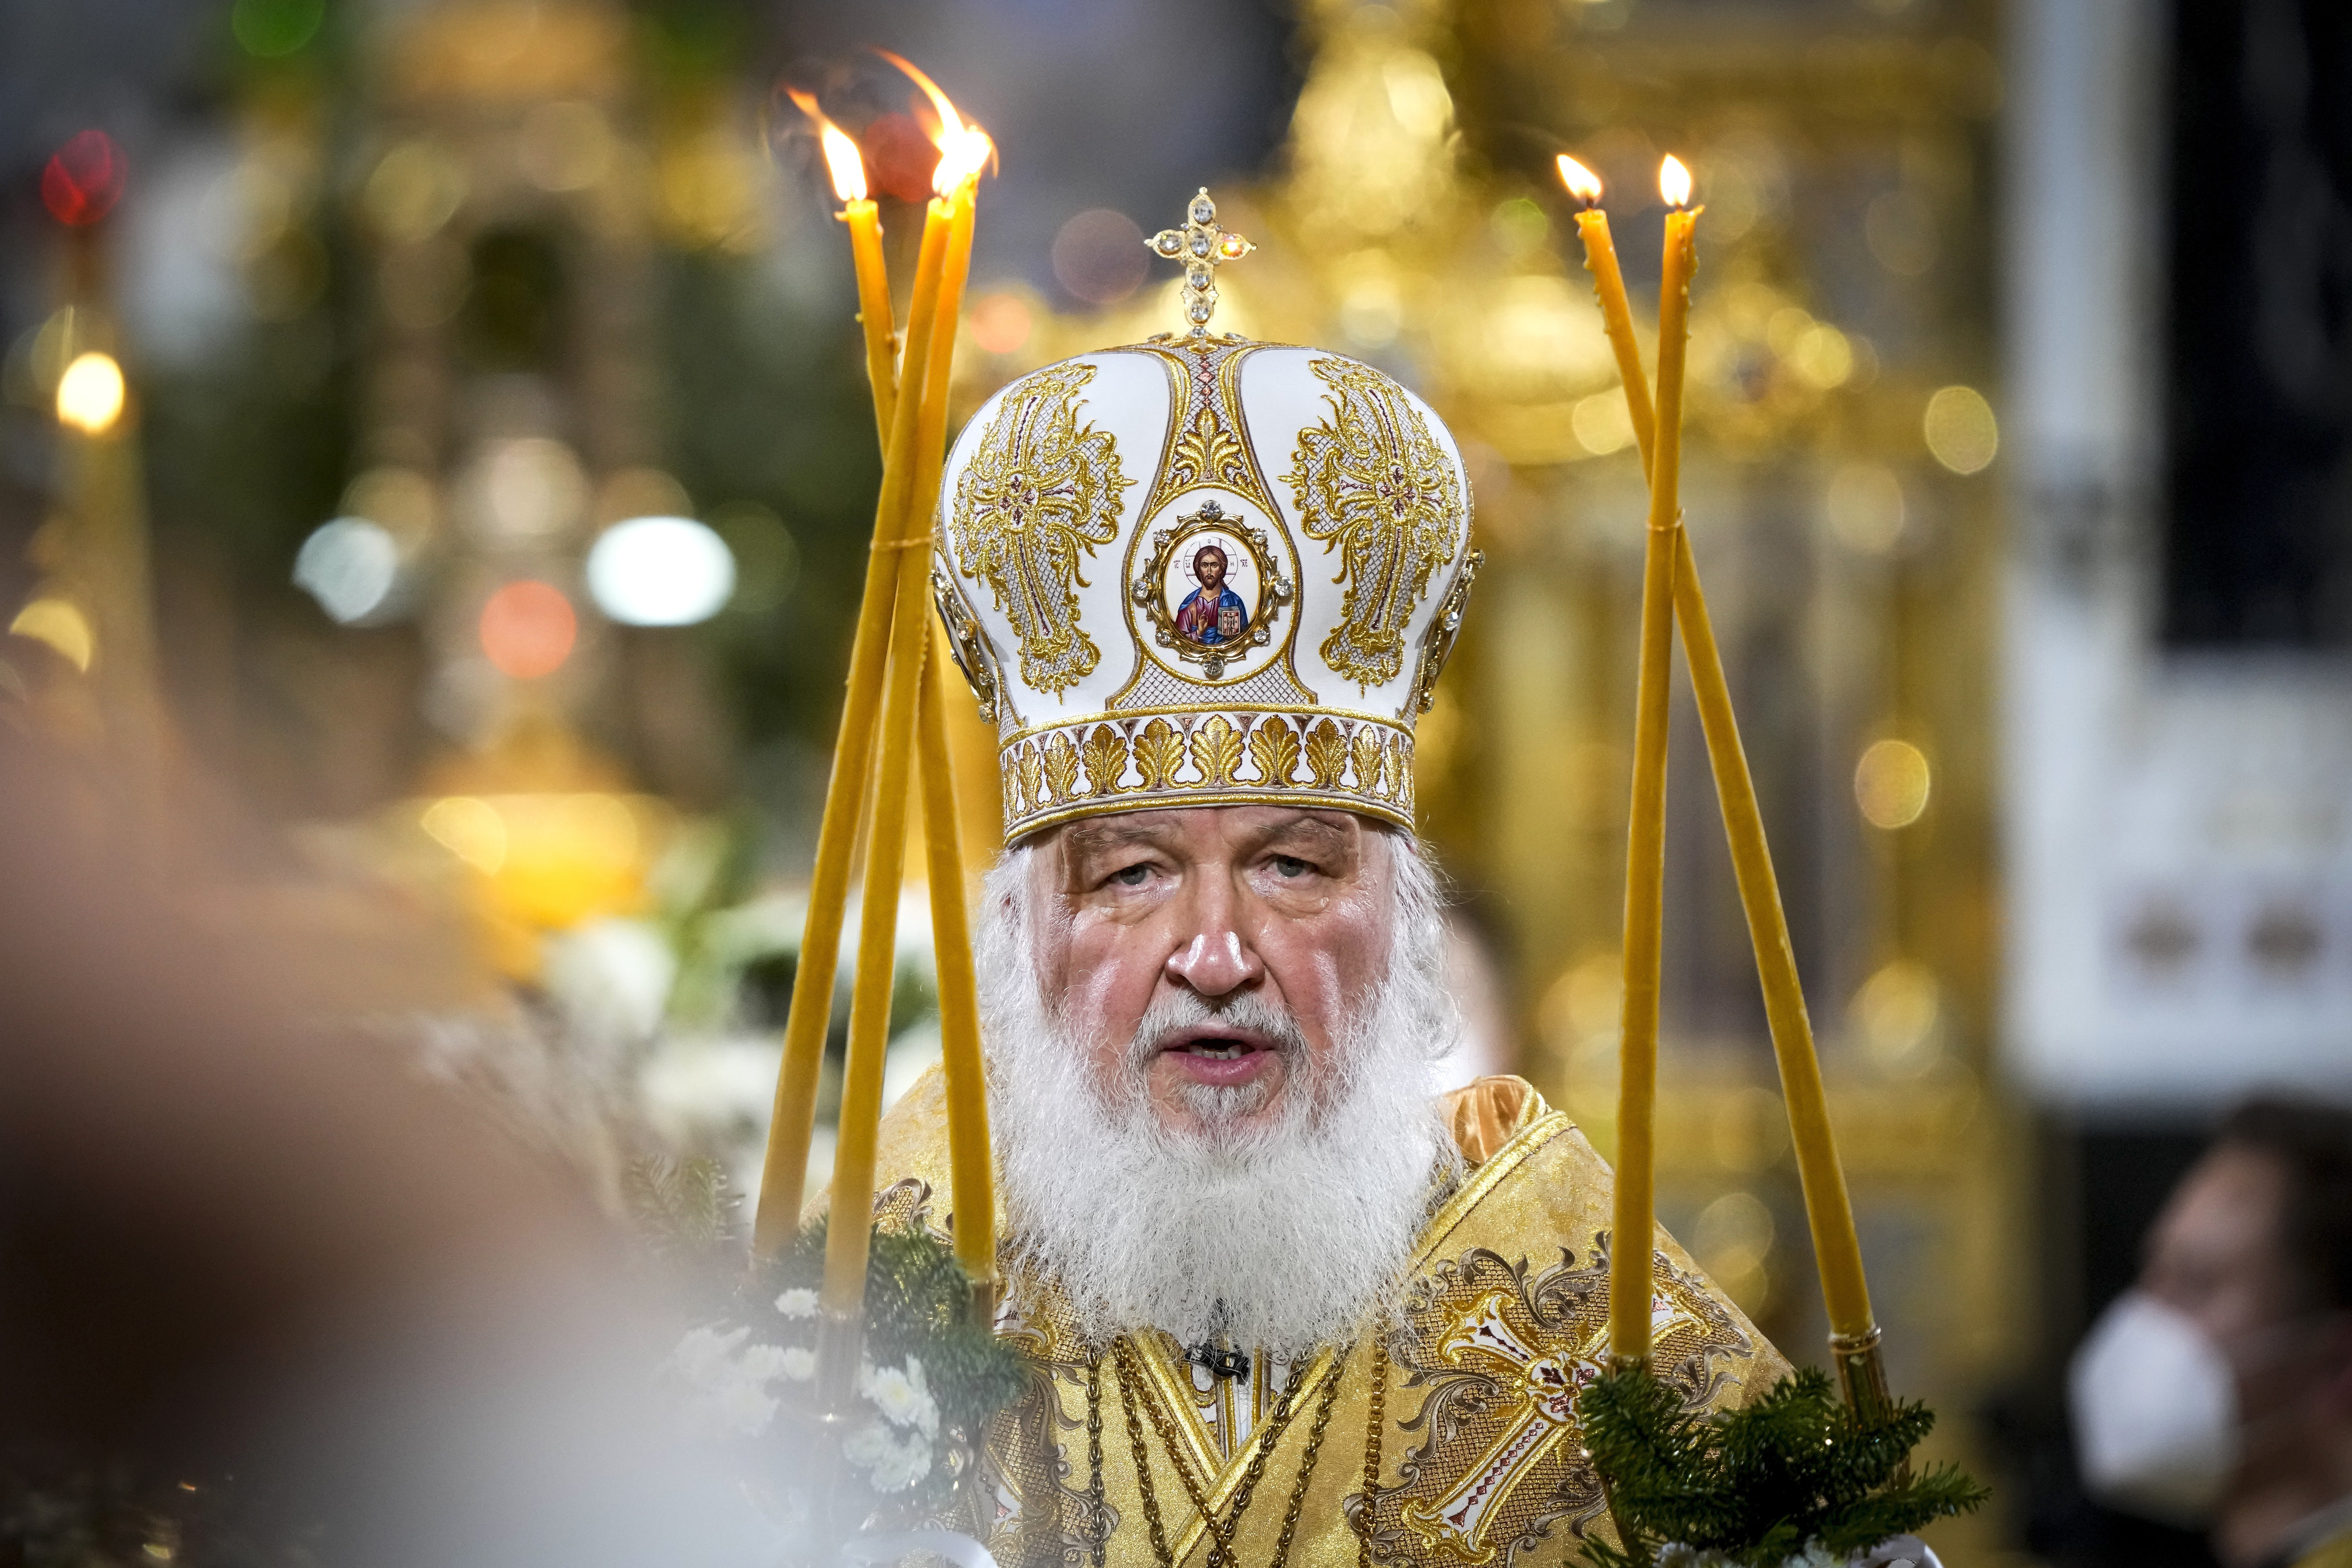 Russian Orthodox Patriarch Kirill delivers the Christmas Liturgy in the Christ the Saviour Cathedral in Moscow, Russia, Thursday, Jan. 6, 2022. Parishioners wearing face masks to protect against coronavirus, observed social distancing guidelines as they attended the liturgy Orthodox Christians celebrate Christmas on Jan. 7, in accordance with the Julian calendar. (AP Photo/Alexander Zemlianichenko)